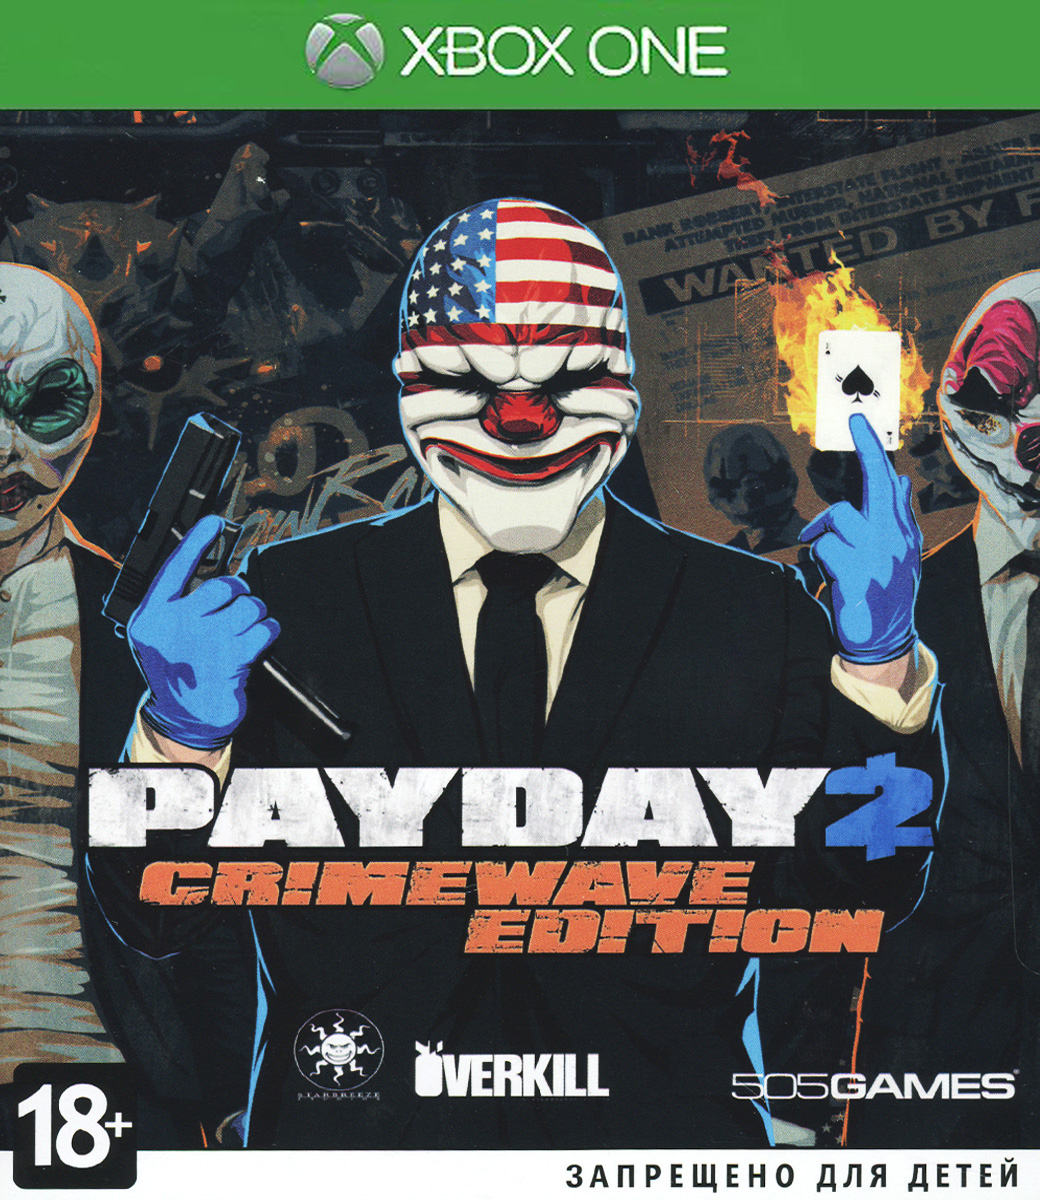 Ps3 payday 2 safecracker edition фото 19